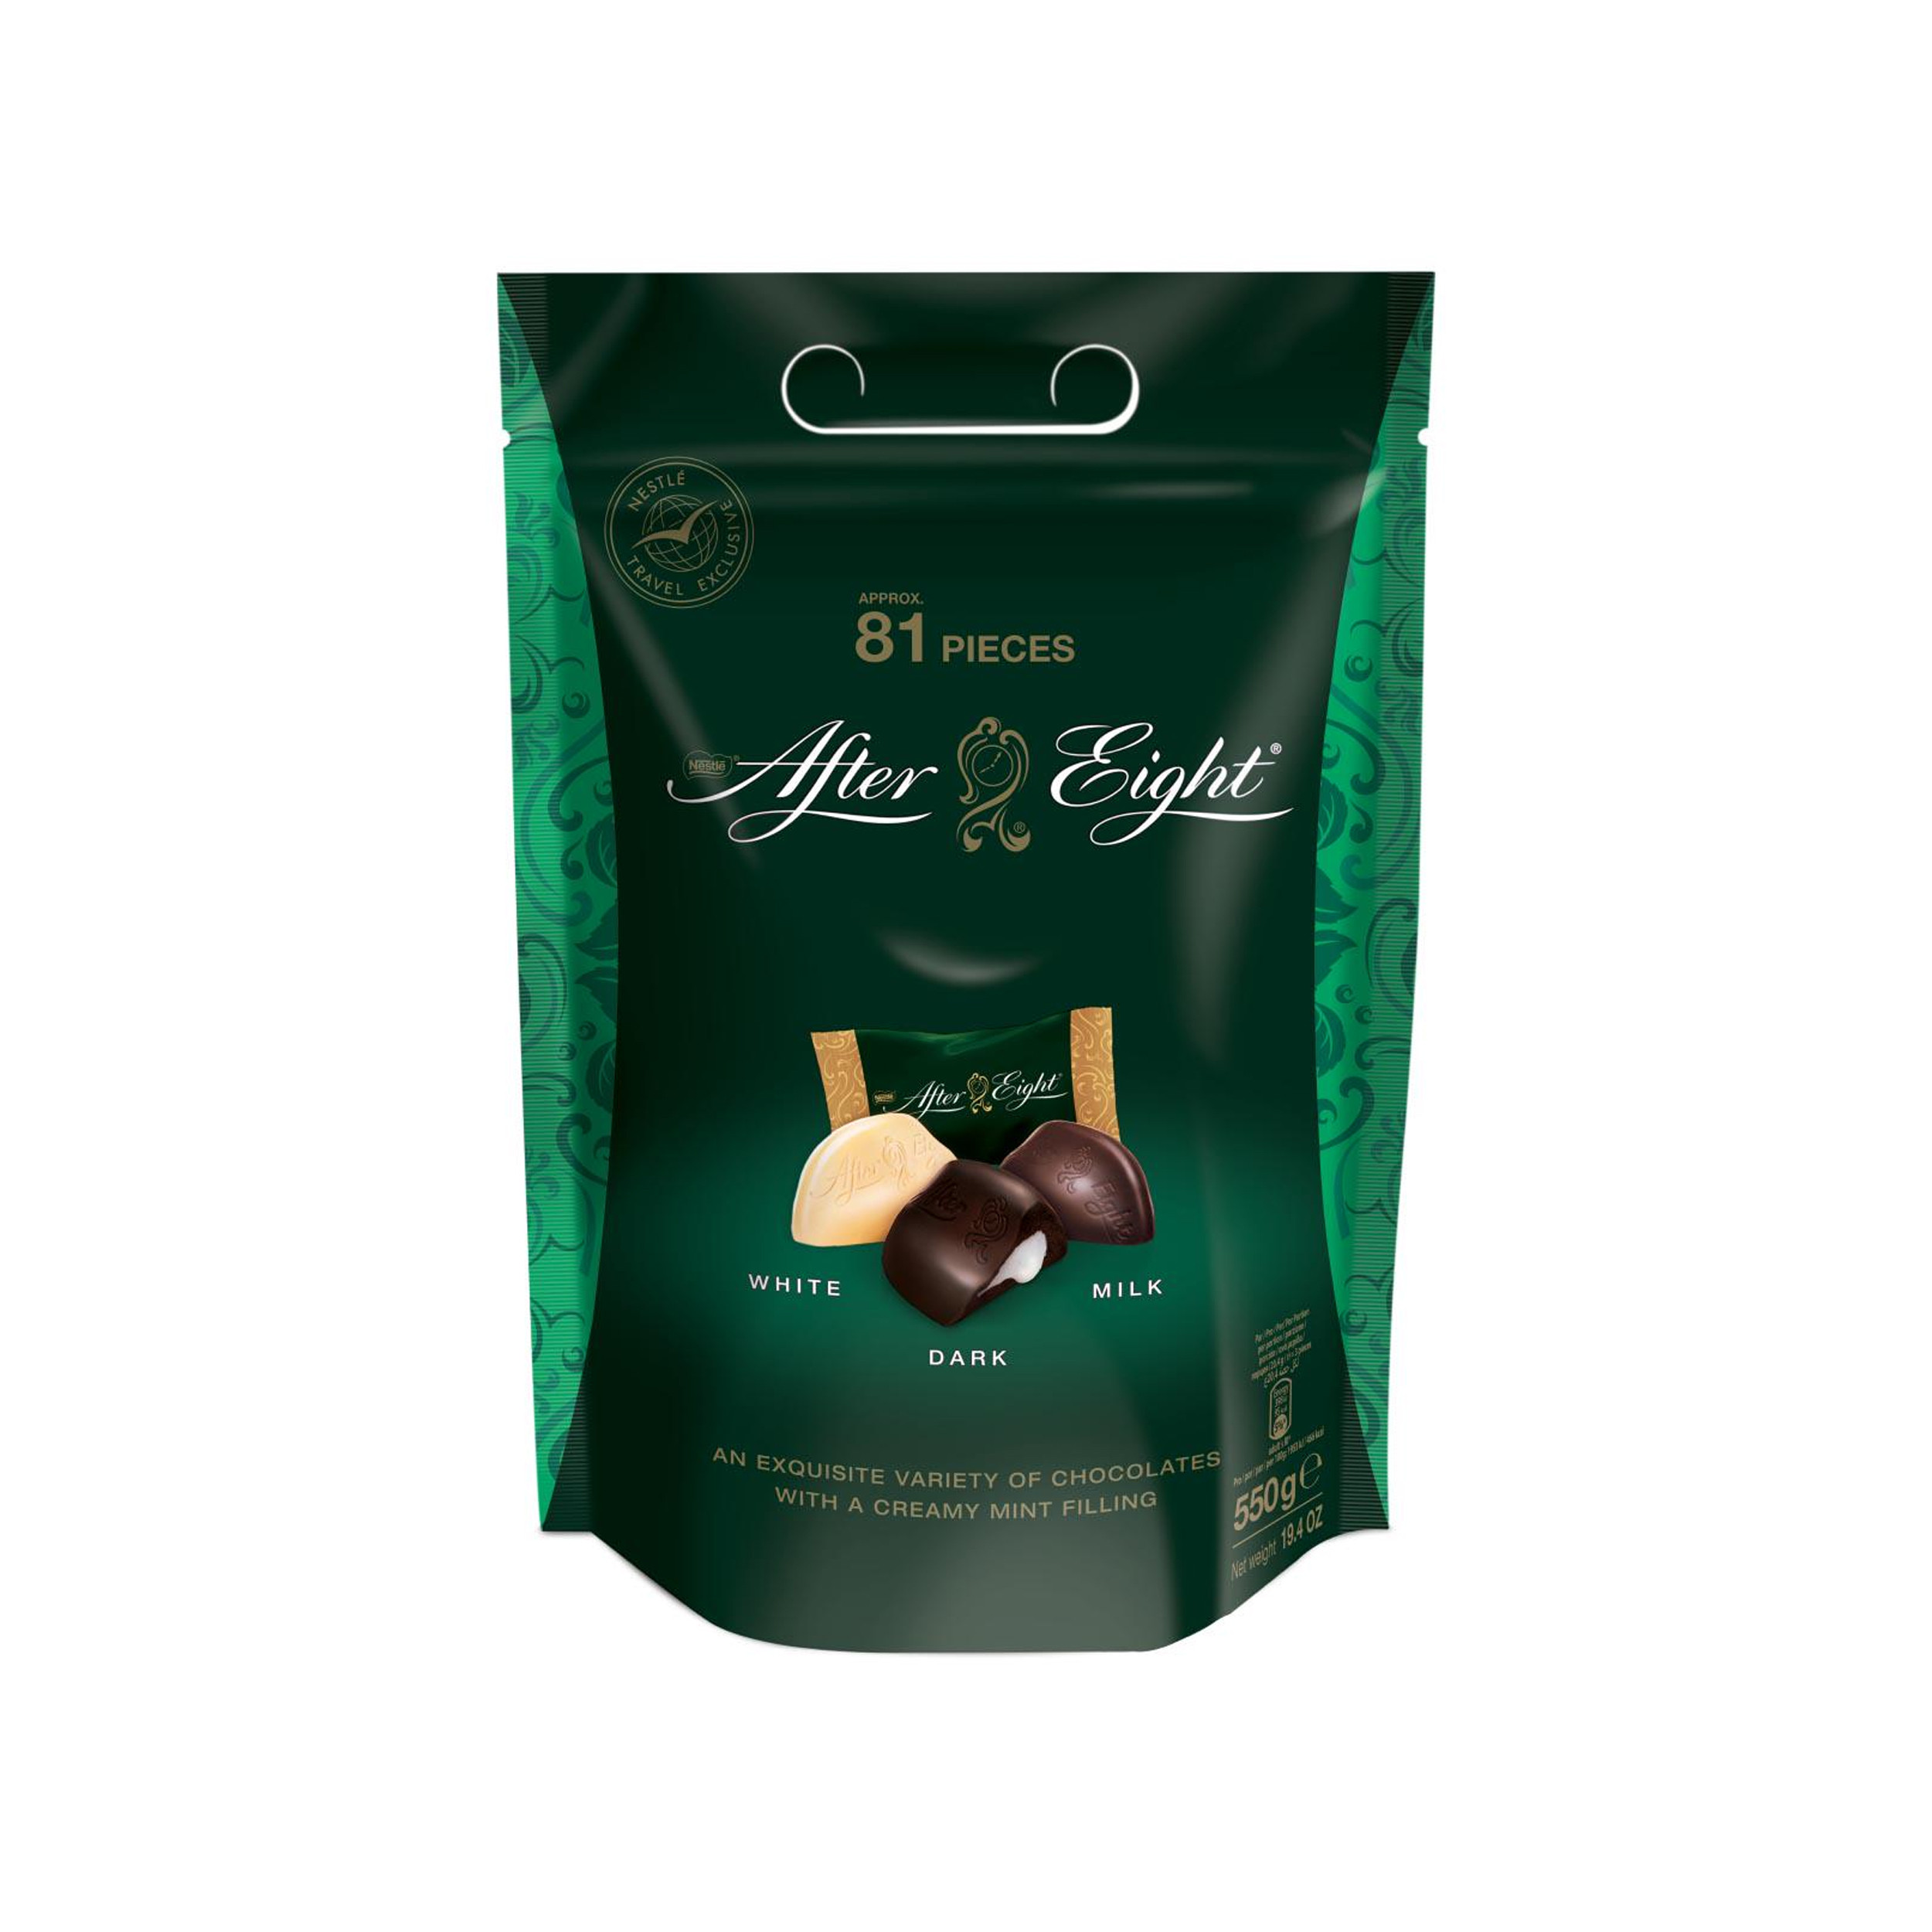 After Eight Bag